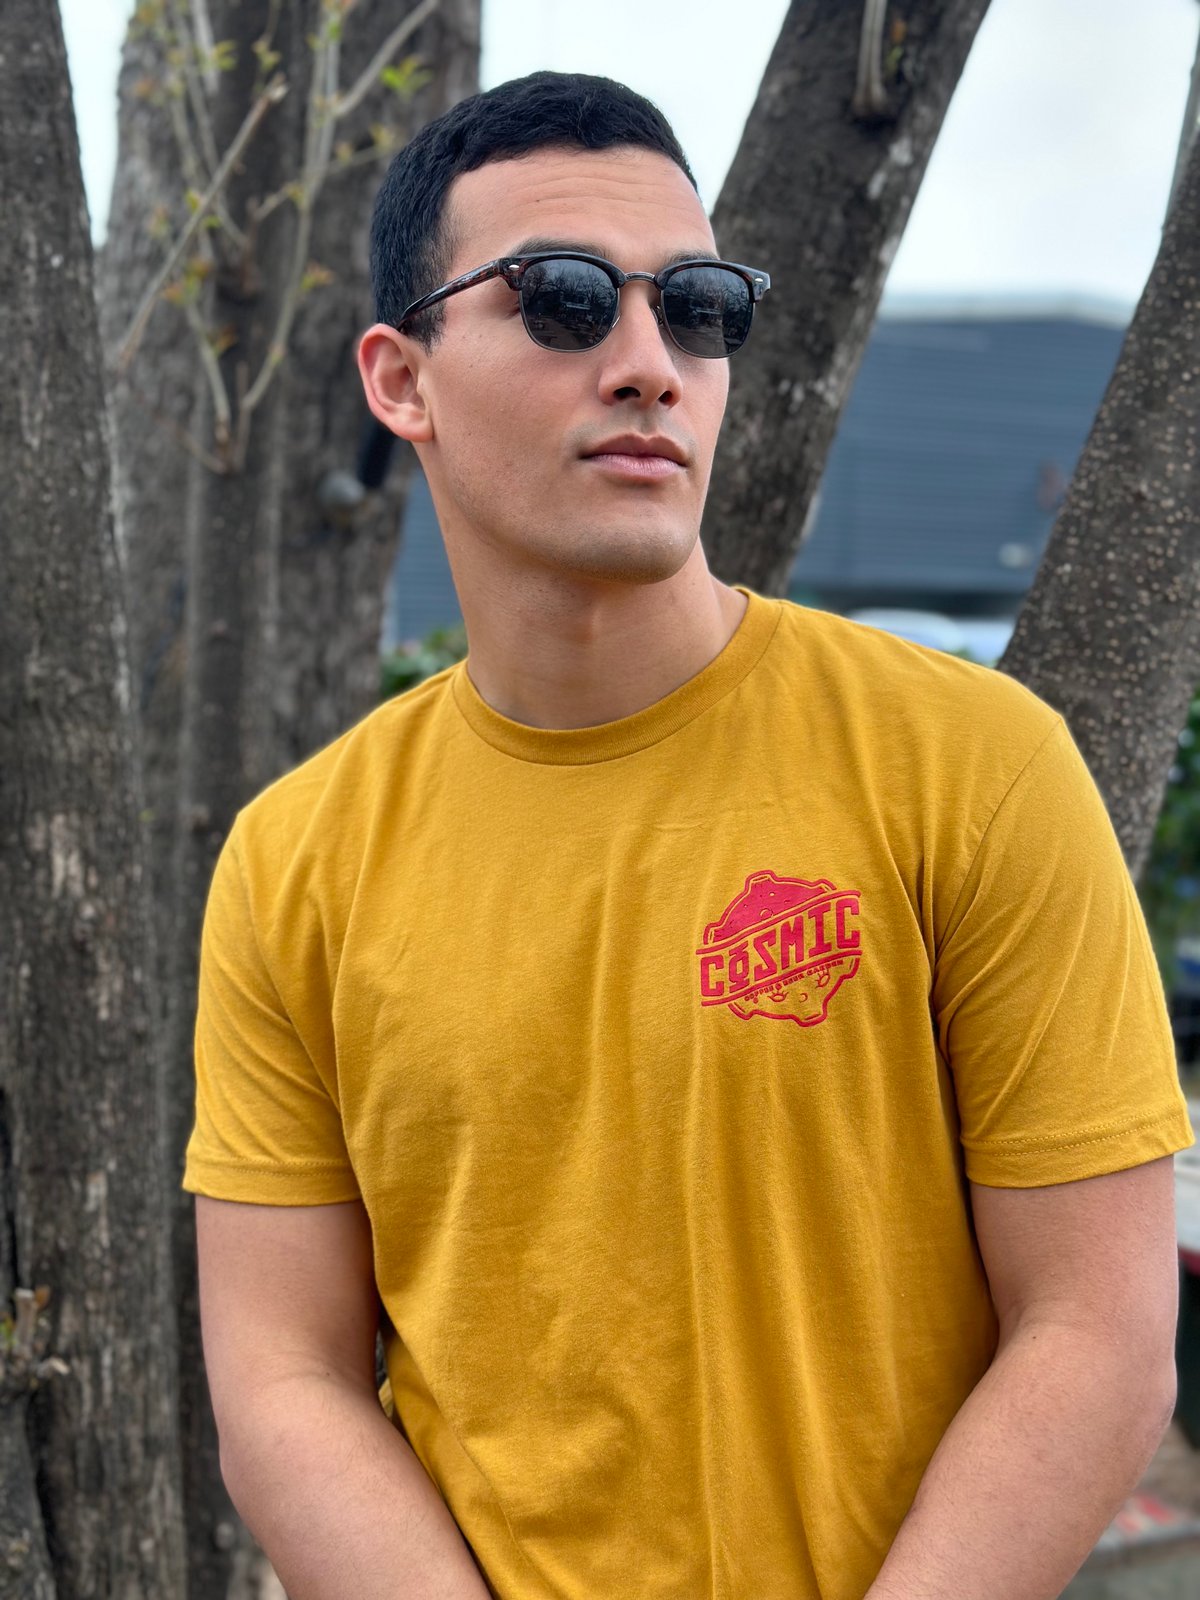  Cosmic Meteor Tee - Mustard Yellow and Red